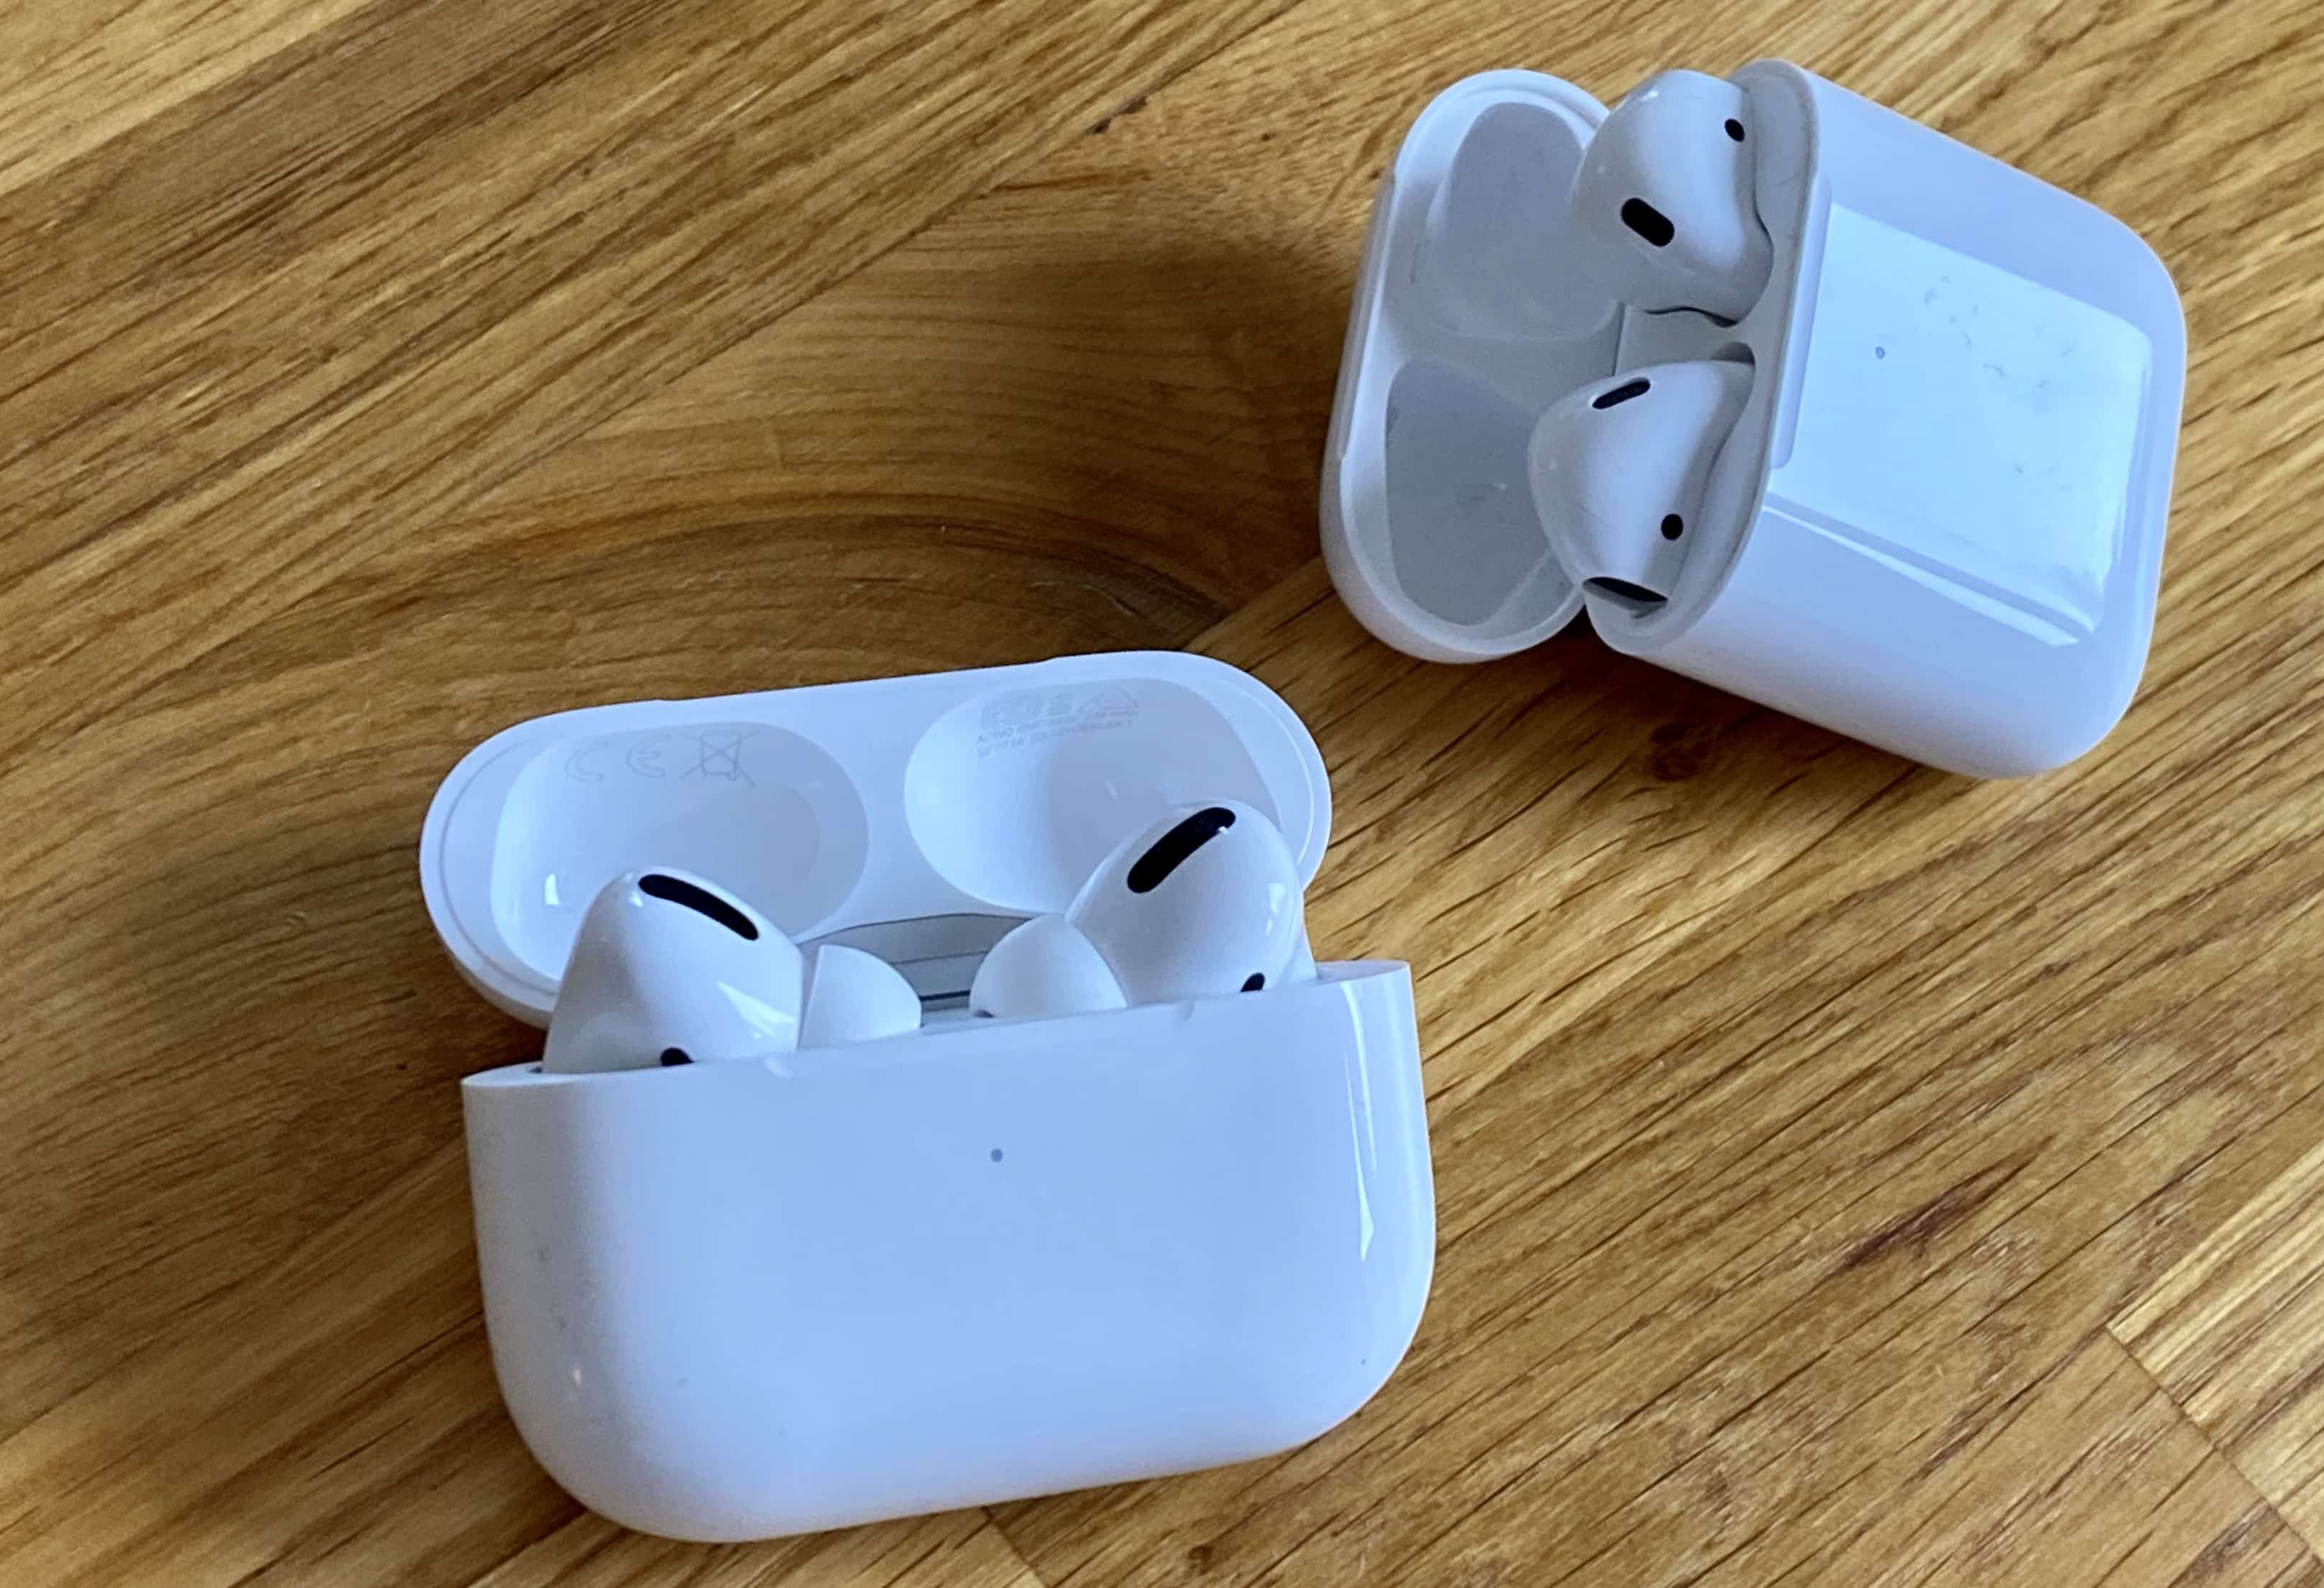 The AirPods Pro case is a little bigger, but not by much